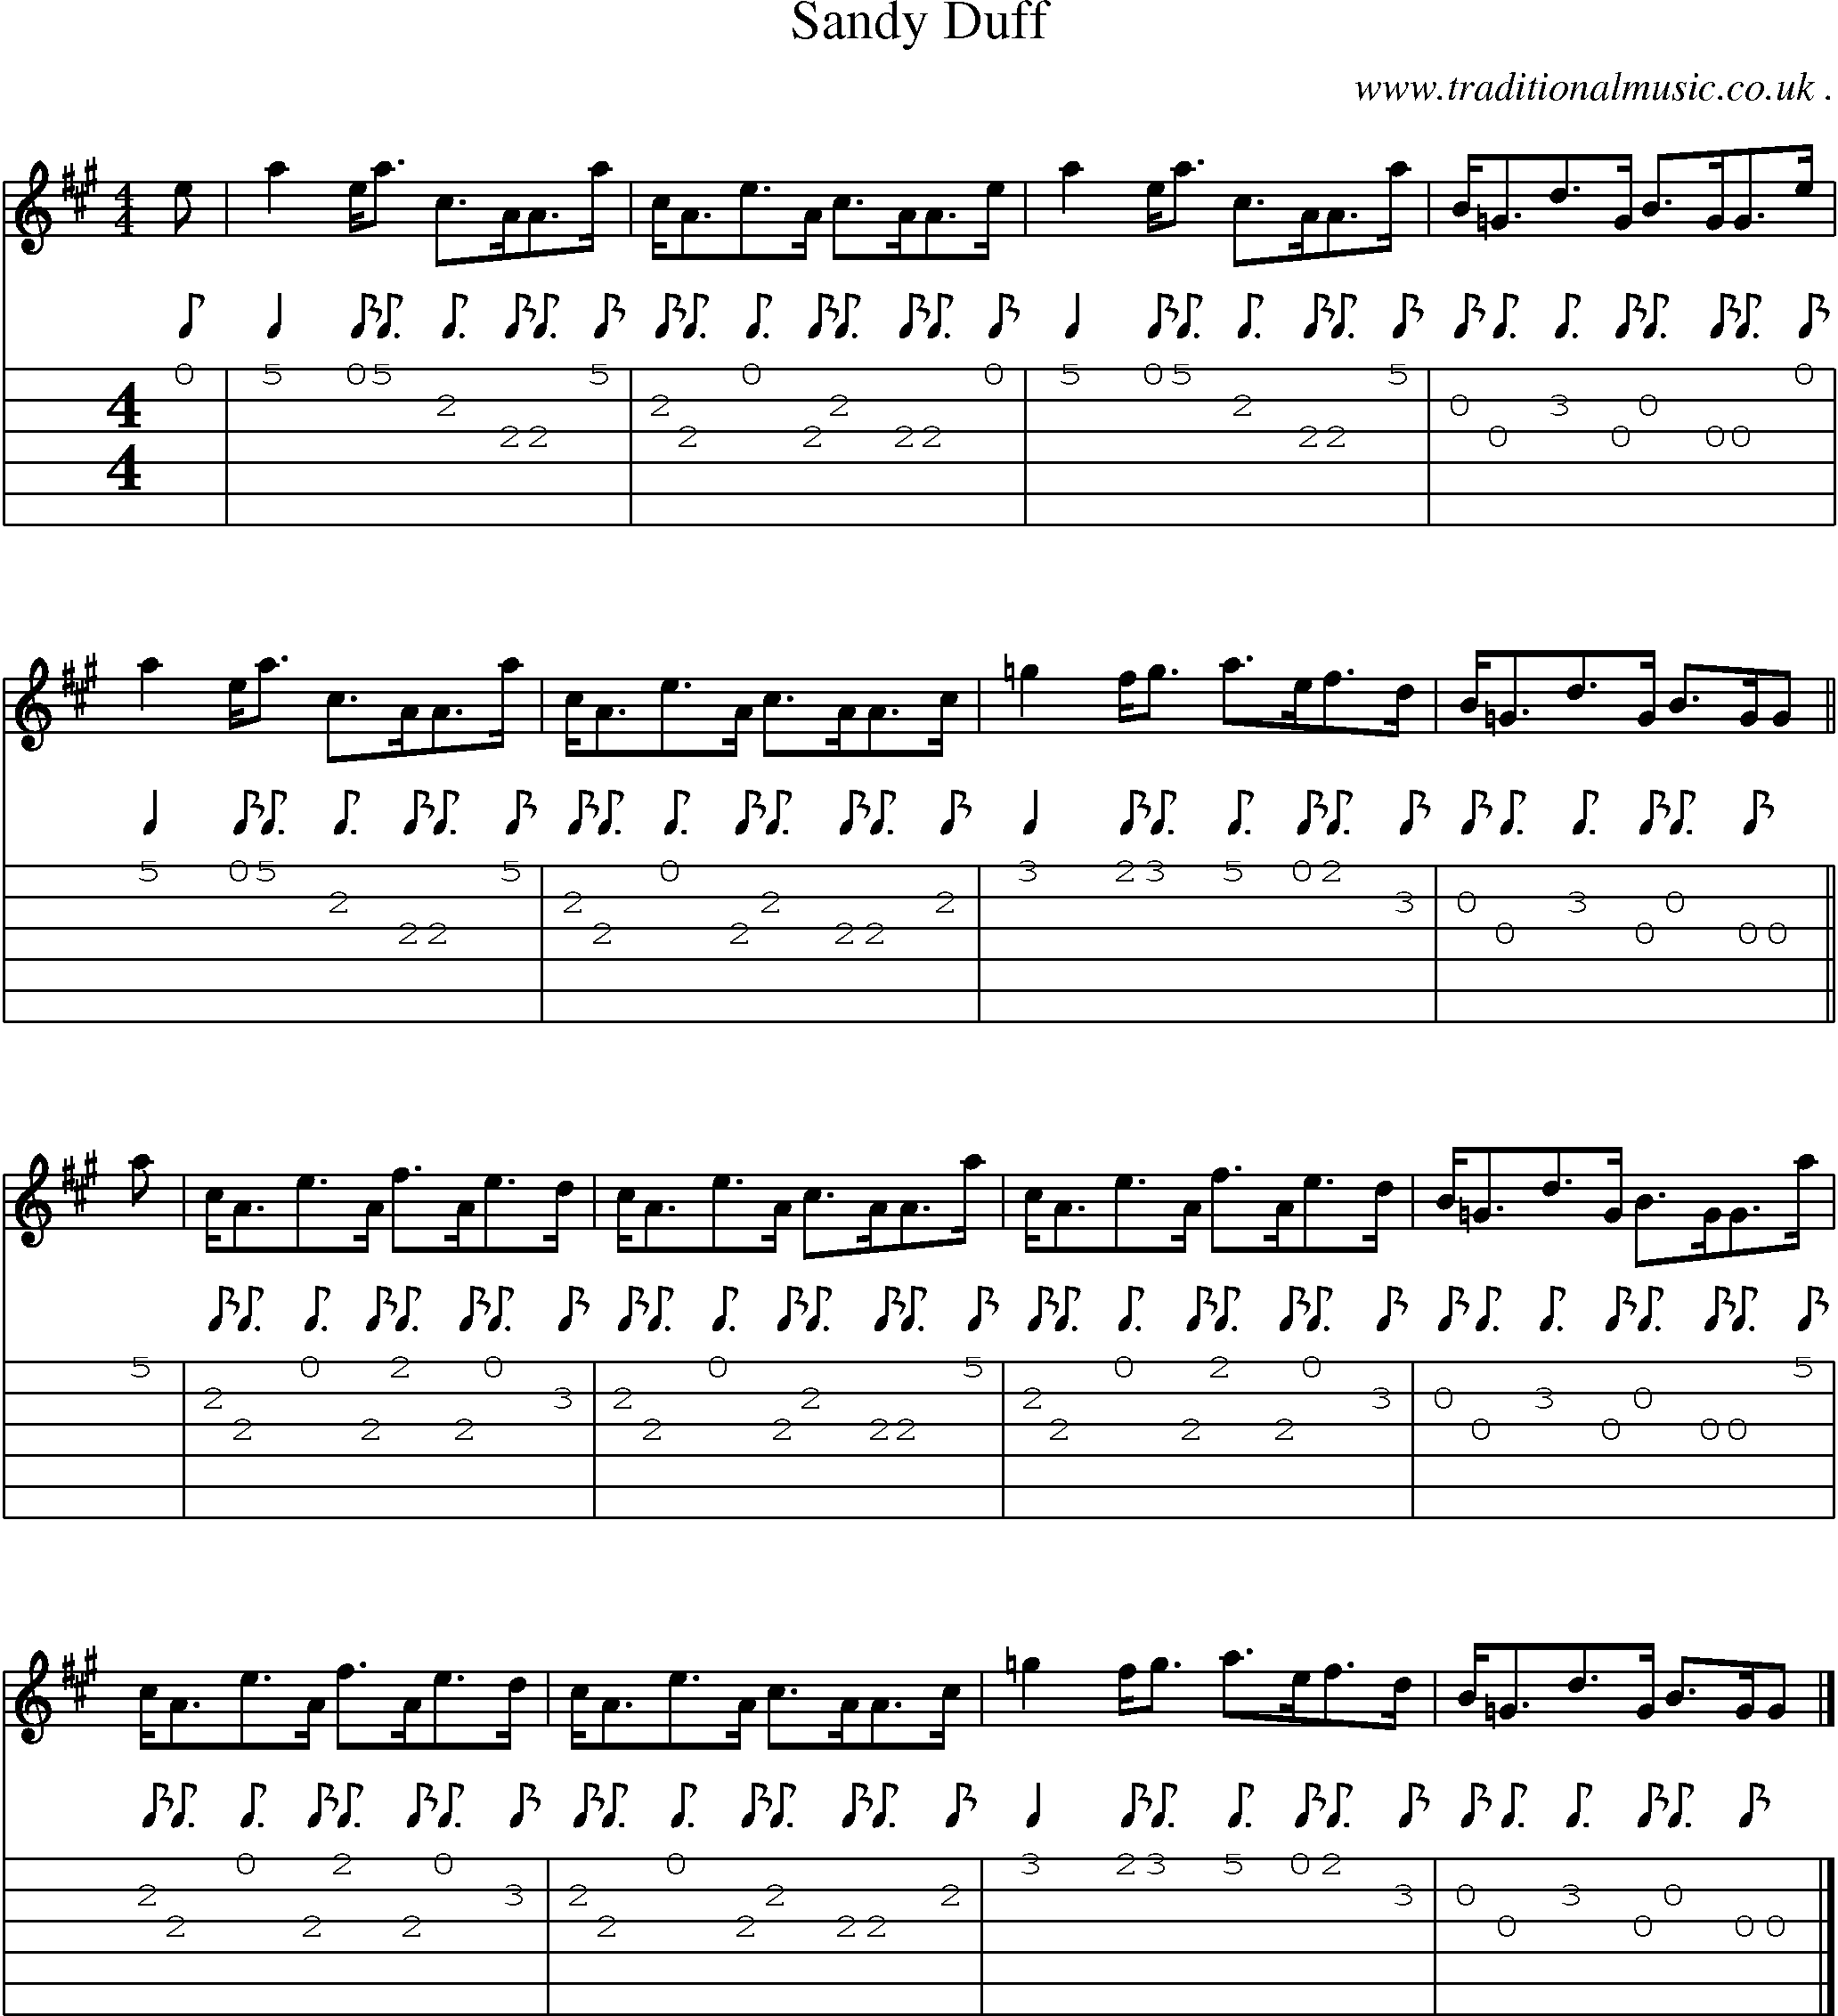 Sheet-music  score, Chords and Guitar Tabs for Sandy Duff